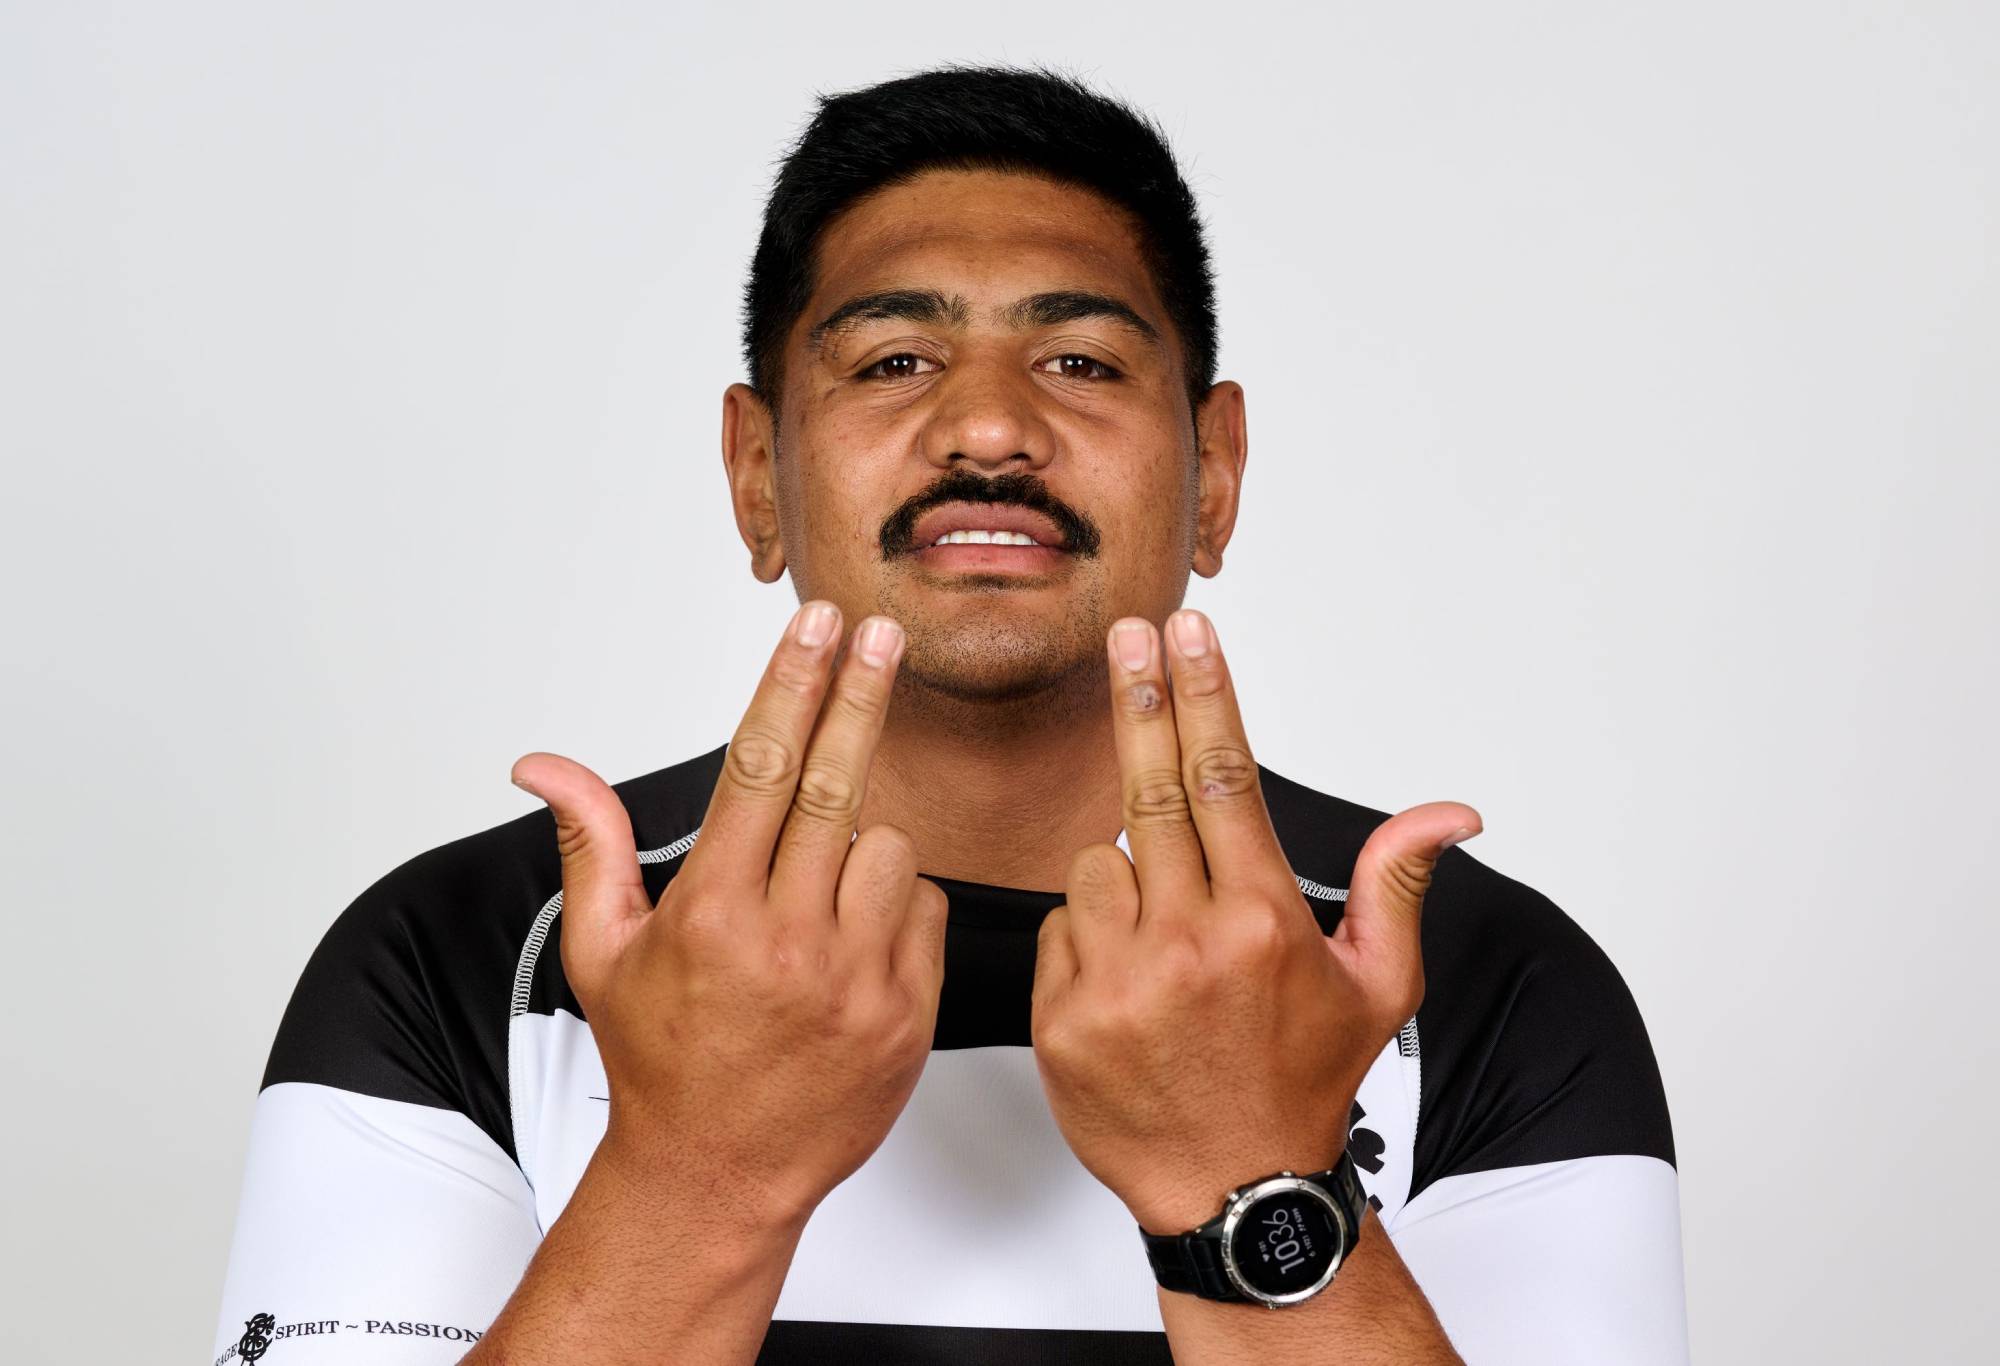 Will Skelton of the Barbarians poses for portrait on June 13, 2022 in Monaco, Monaco. The Barbarians will play England at Twickenham on Sunday, June 19. (Photo by Mattia Ozbot/Getty Images for Barbarians)